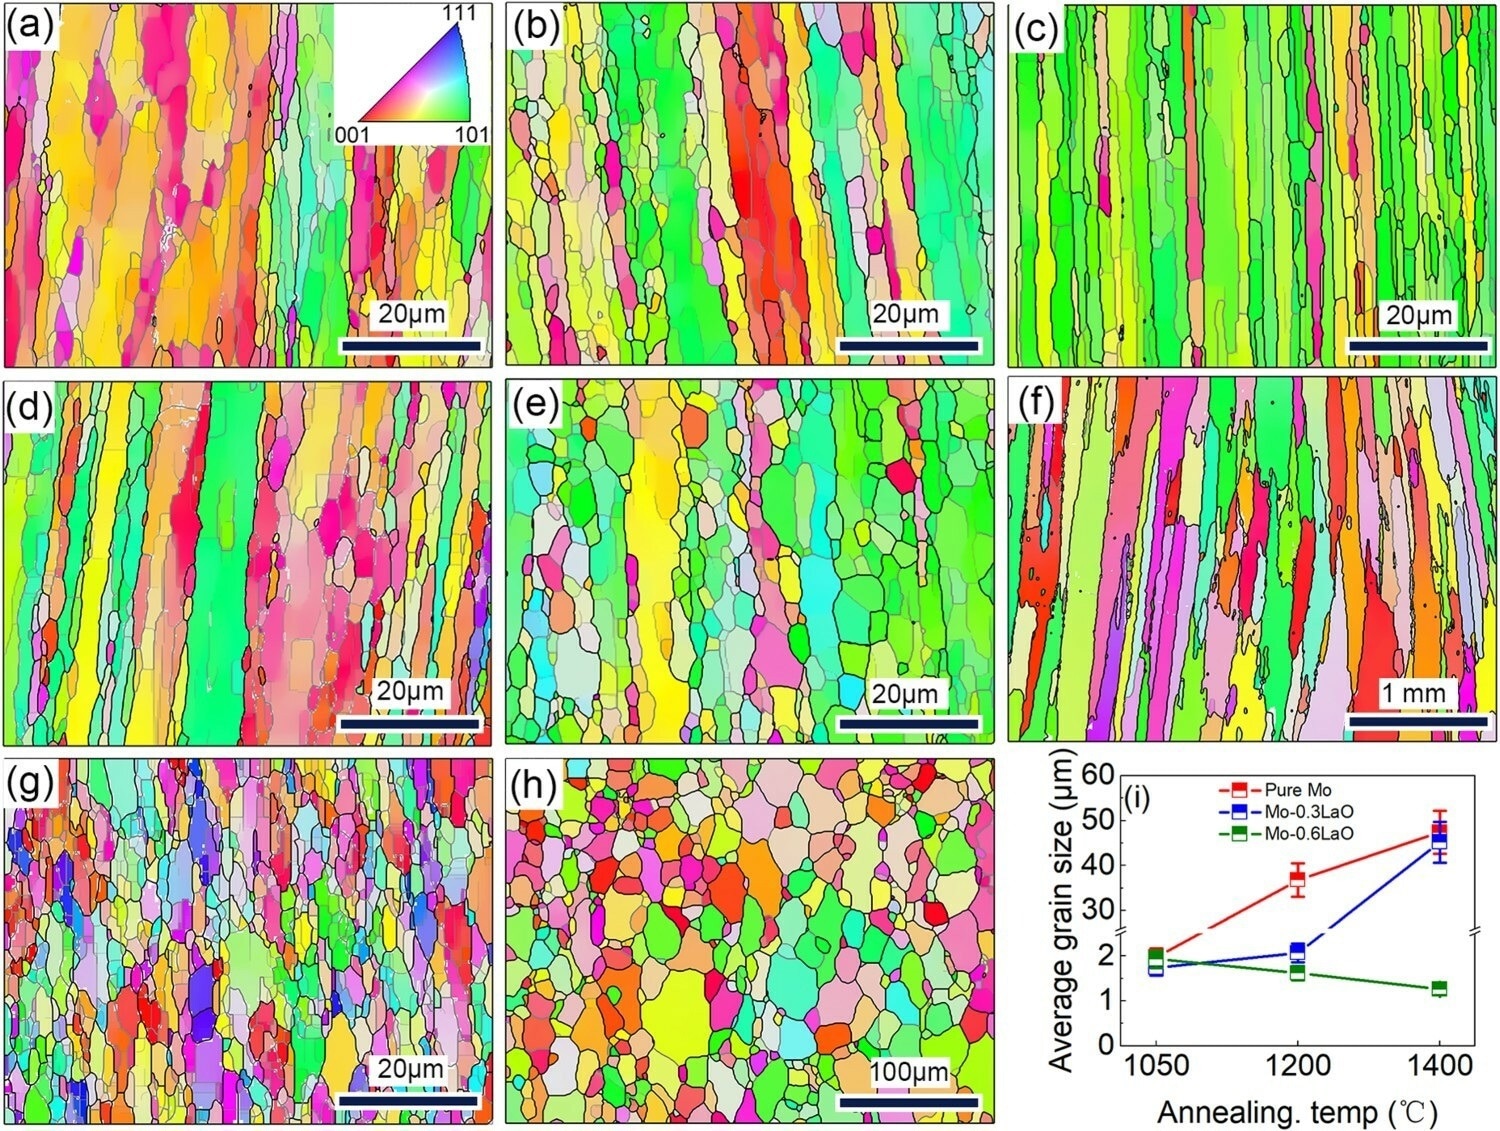 Representative EBSD IPF coloring maps of Mo-0.6LaO alloy (a–c), Mo-0.3LaO alloy (d–f), and pure Mo (g–h) annealed at Ta?=?1050 °C (a,d,g), 1200 °C (b, e, h), and 1400 °C (c,f), respectively. Statistical results of the Ta -dependent average grain size are shown in (i).